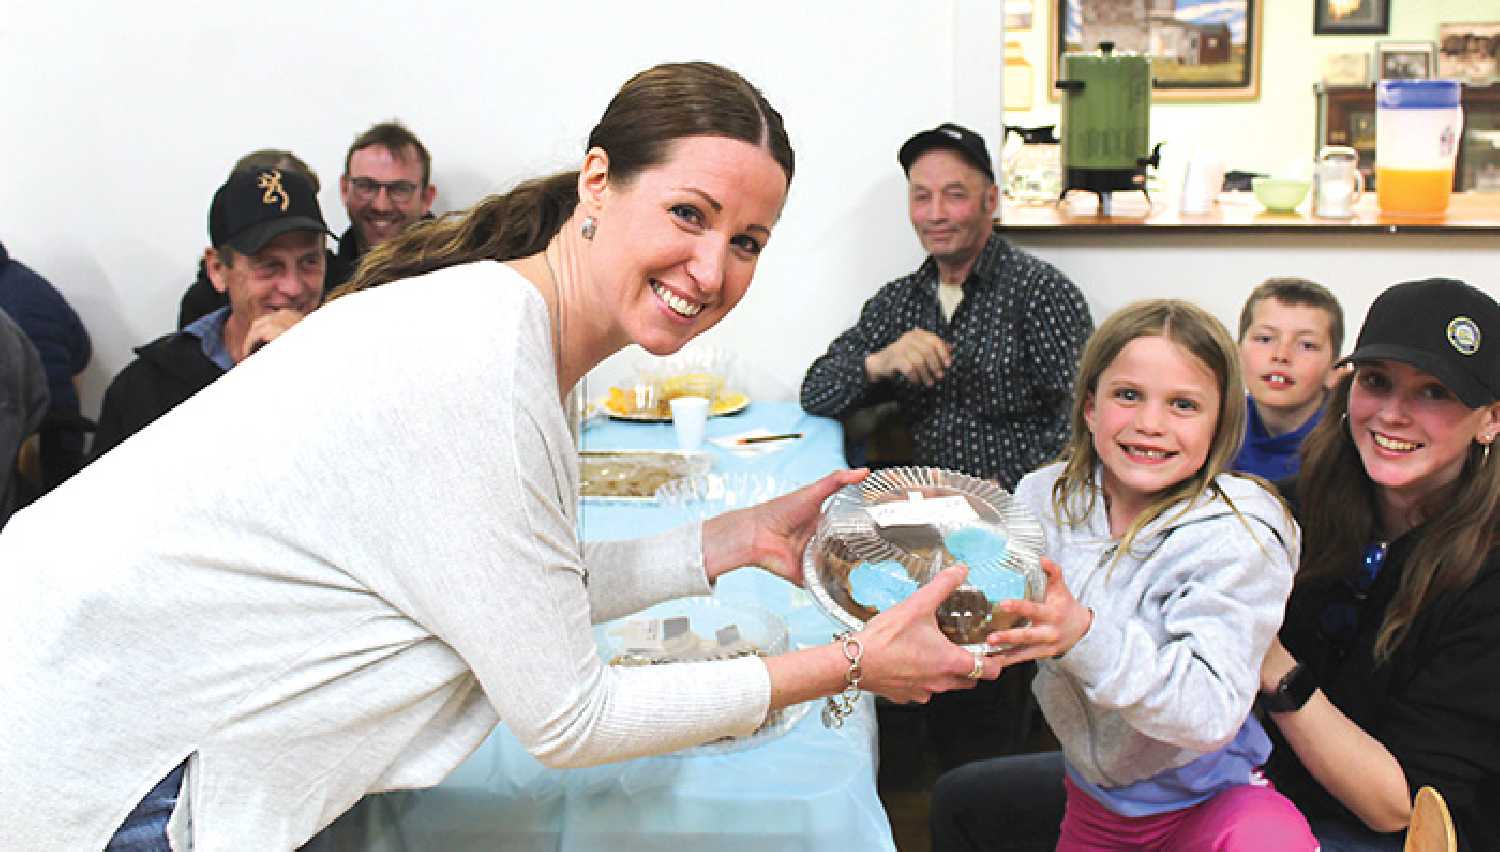 Kari Kosior hands a plate of cupcakes to her daughter Rayna, who was one of the winning bidders at the Fleming Pie Auction on April 5.